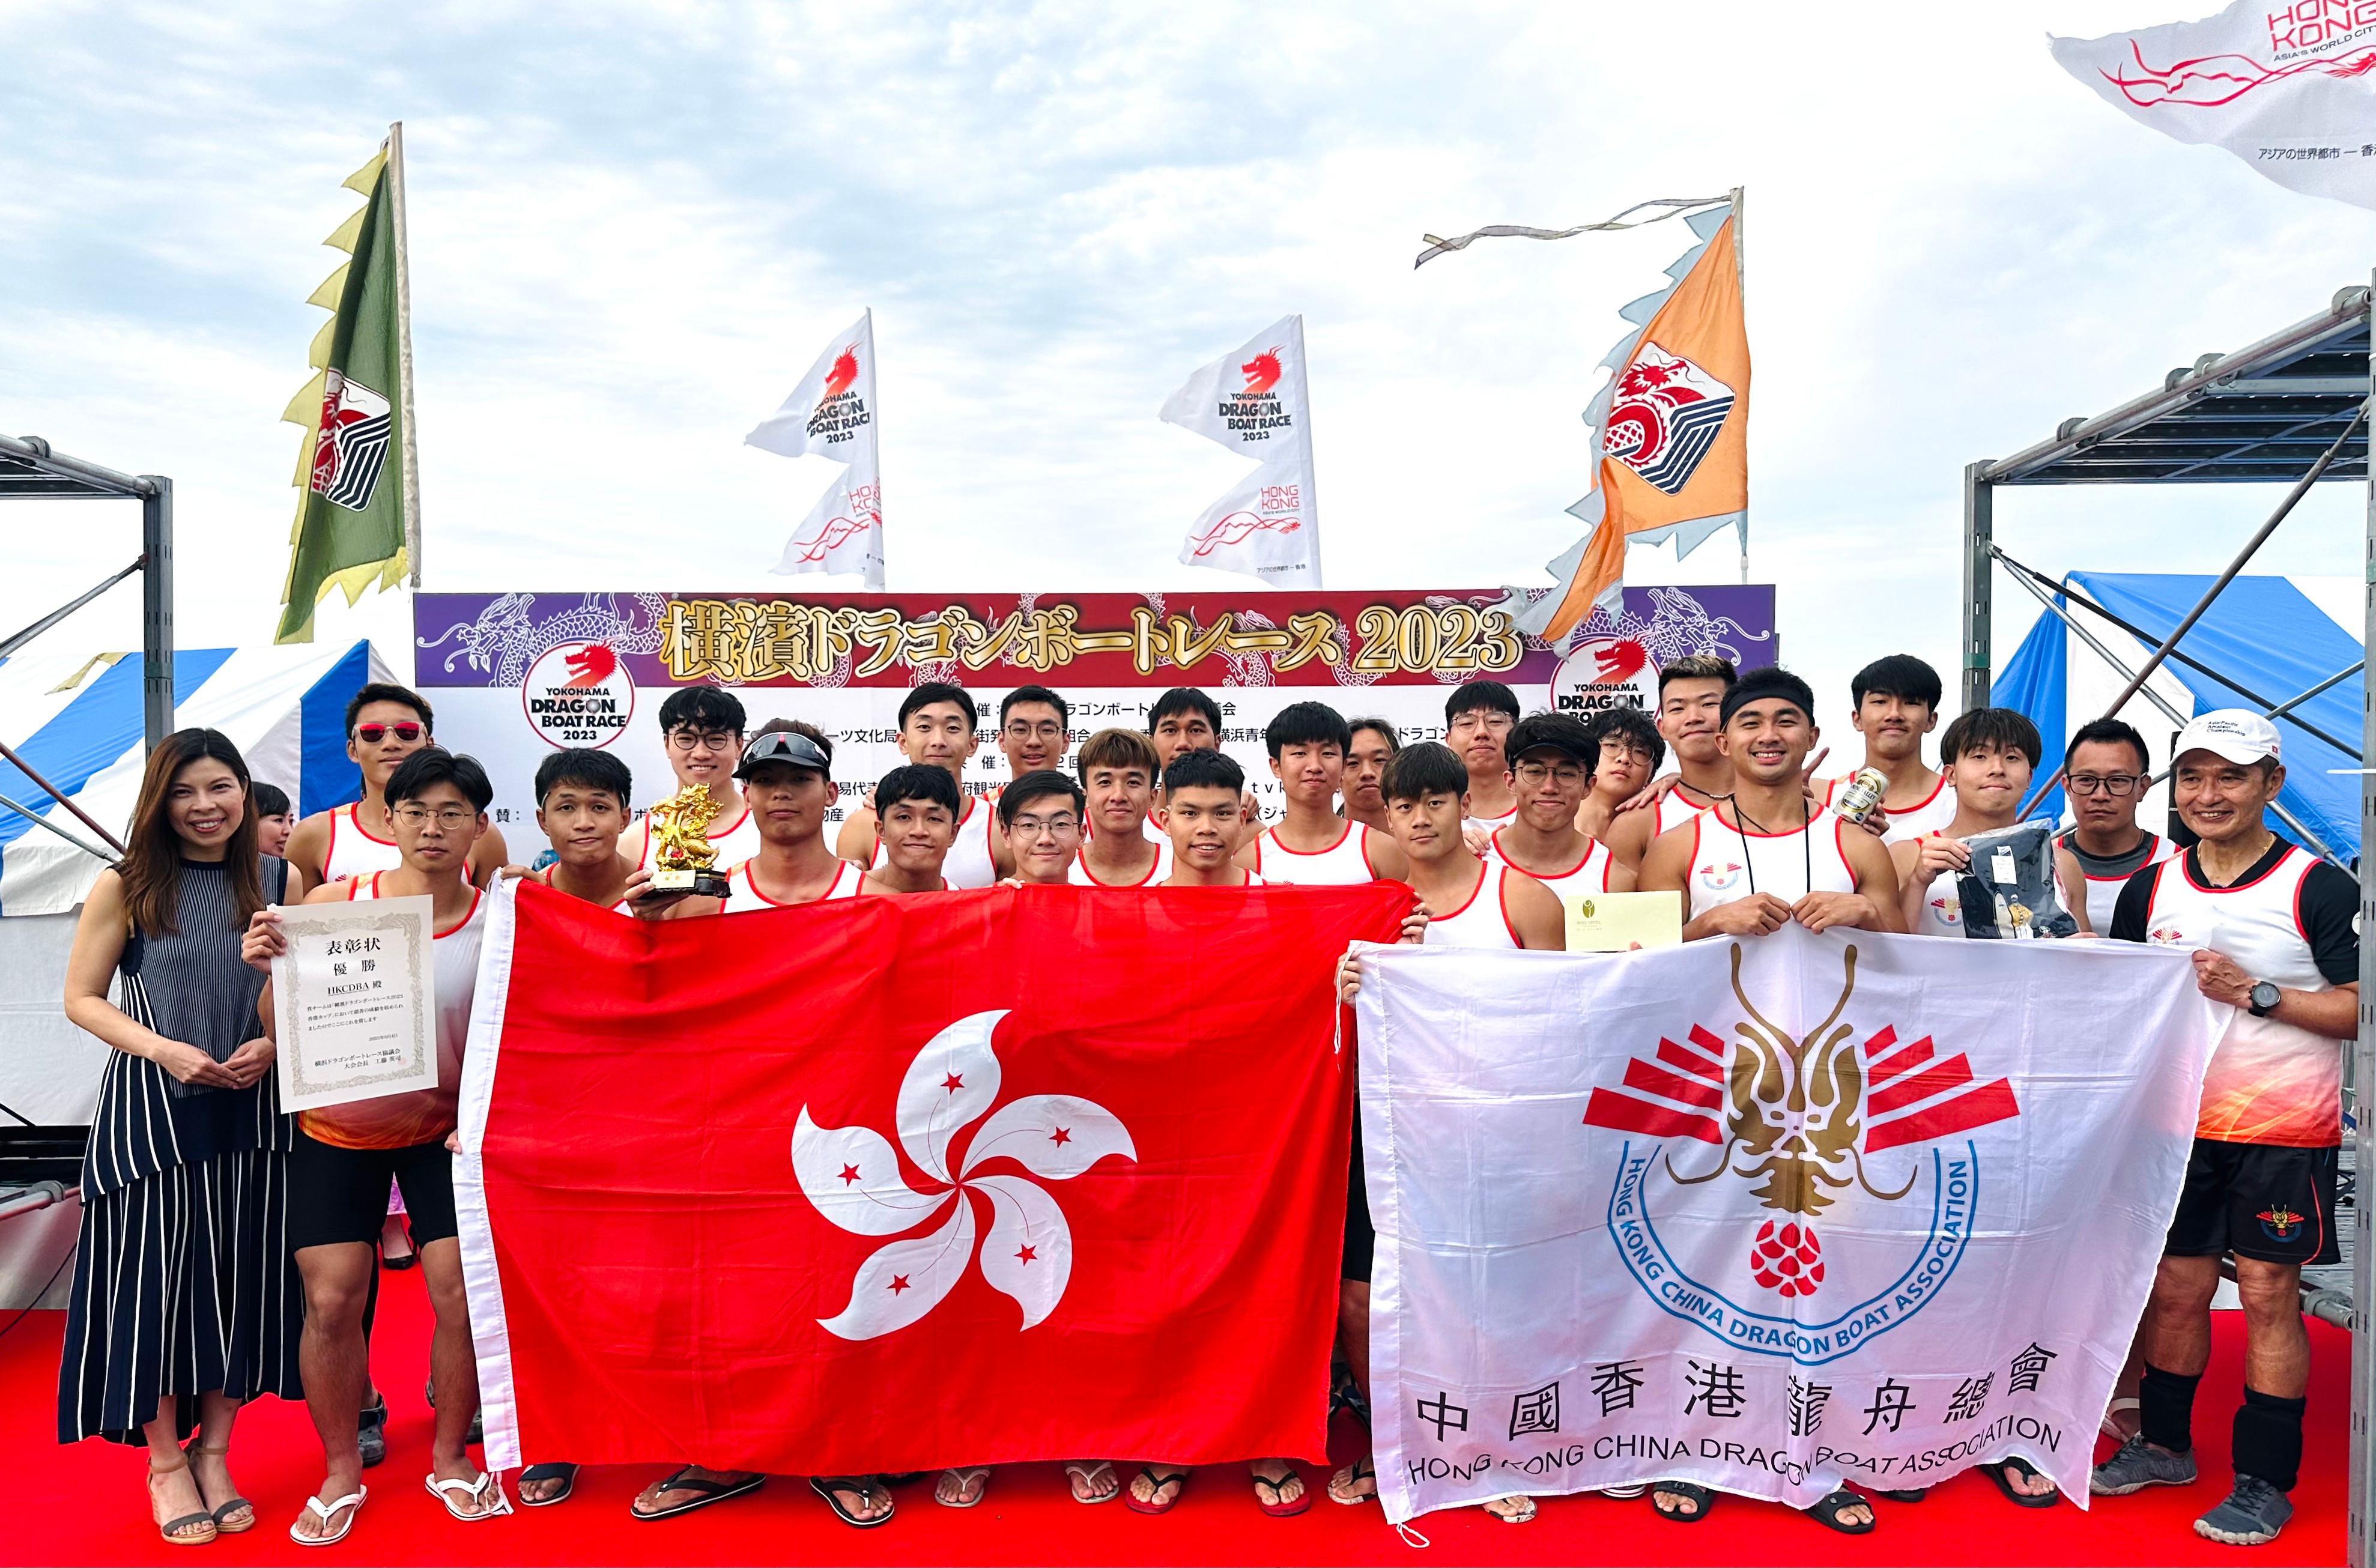 The Hong Kong Cup dragon boat race was held at the promenade of Yamashita Park in Yokohama, Japan, today (June 4). Photo shows the Principal Hong Kong Economic and Trade Representative (Tokyo), Miss Winsome Au (front row, first left), with the champion team of the Hong Kong Cup - Hong Kong China Dragon Boat Association.